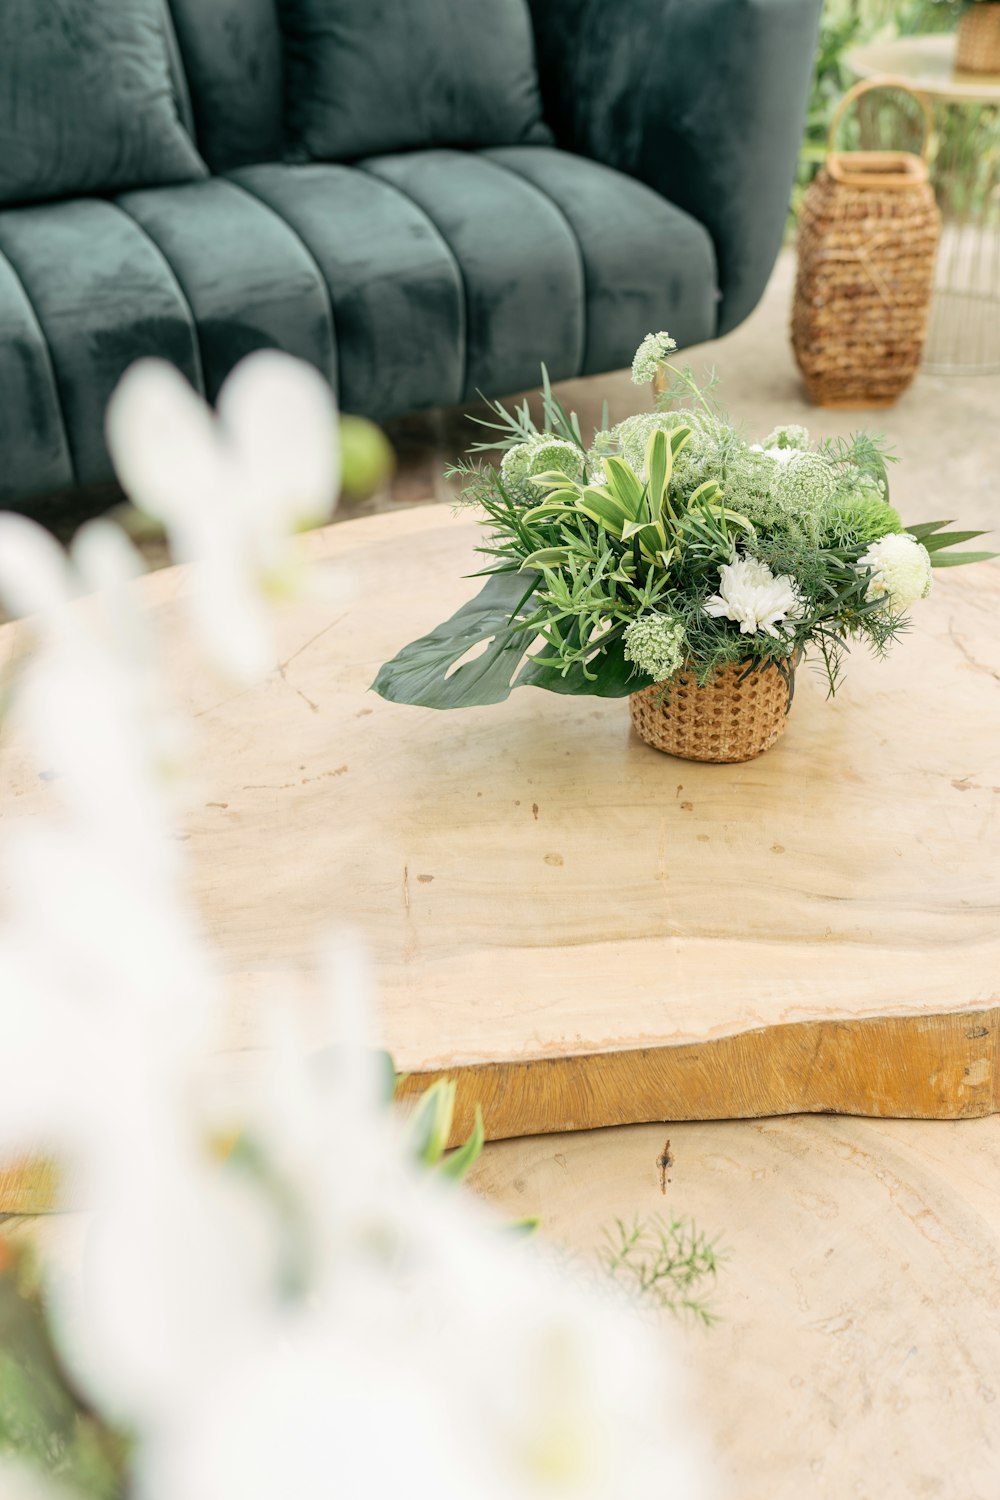 a wooden table topped with a basket filled with flowers